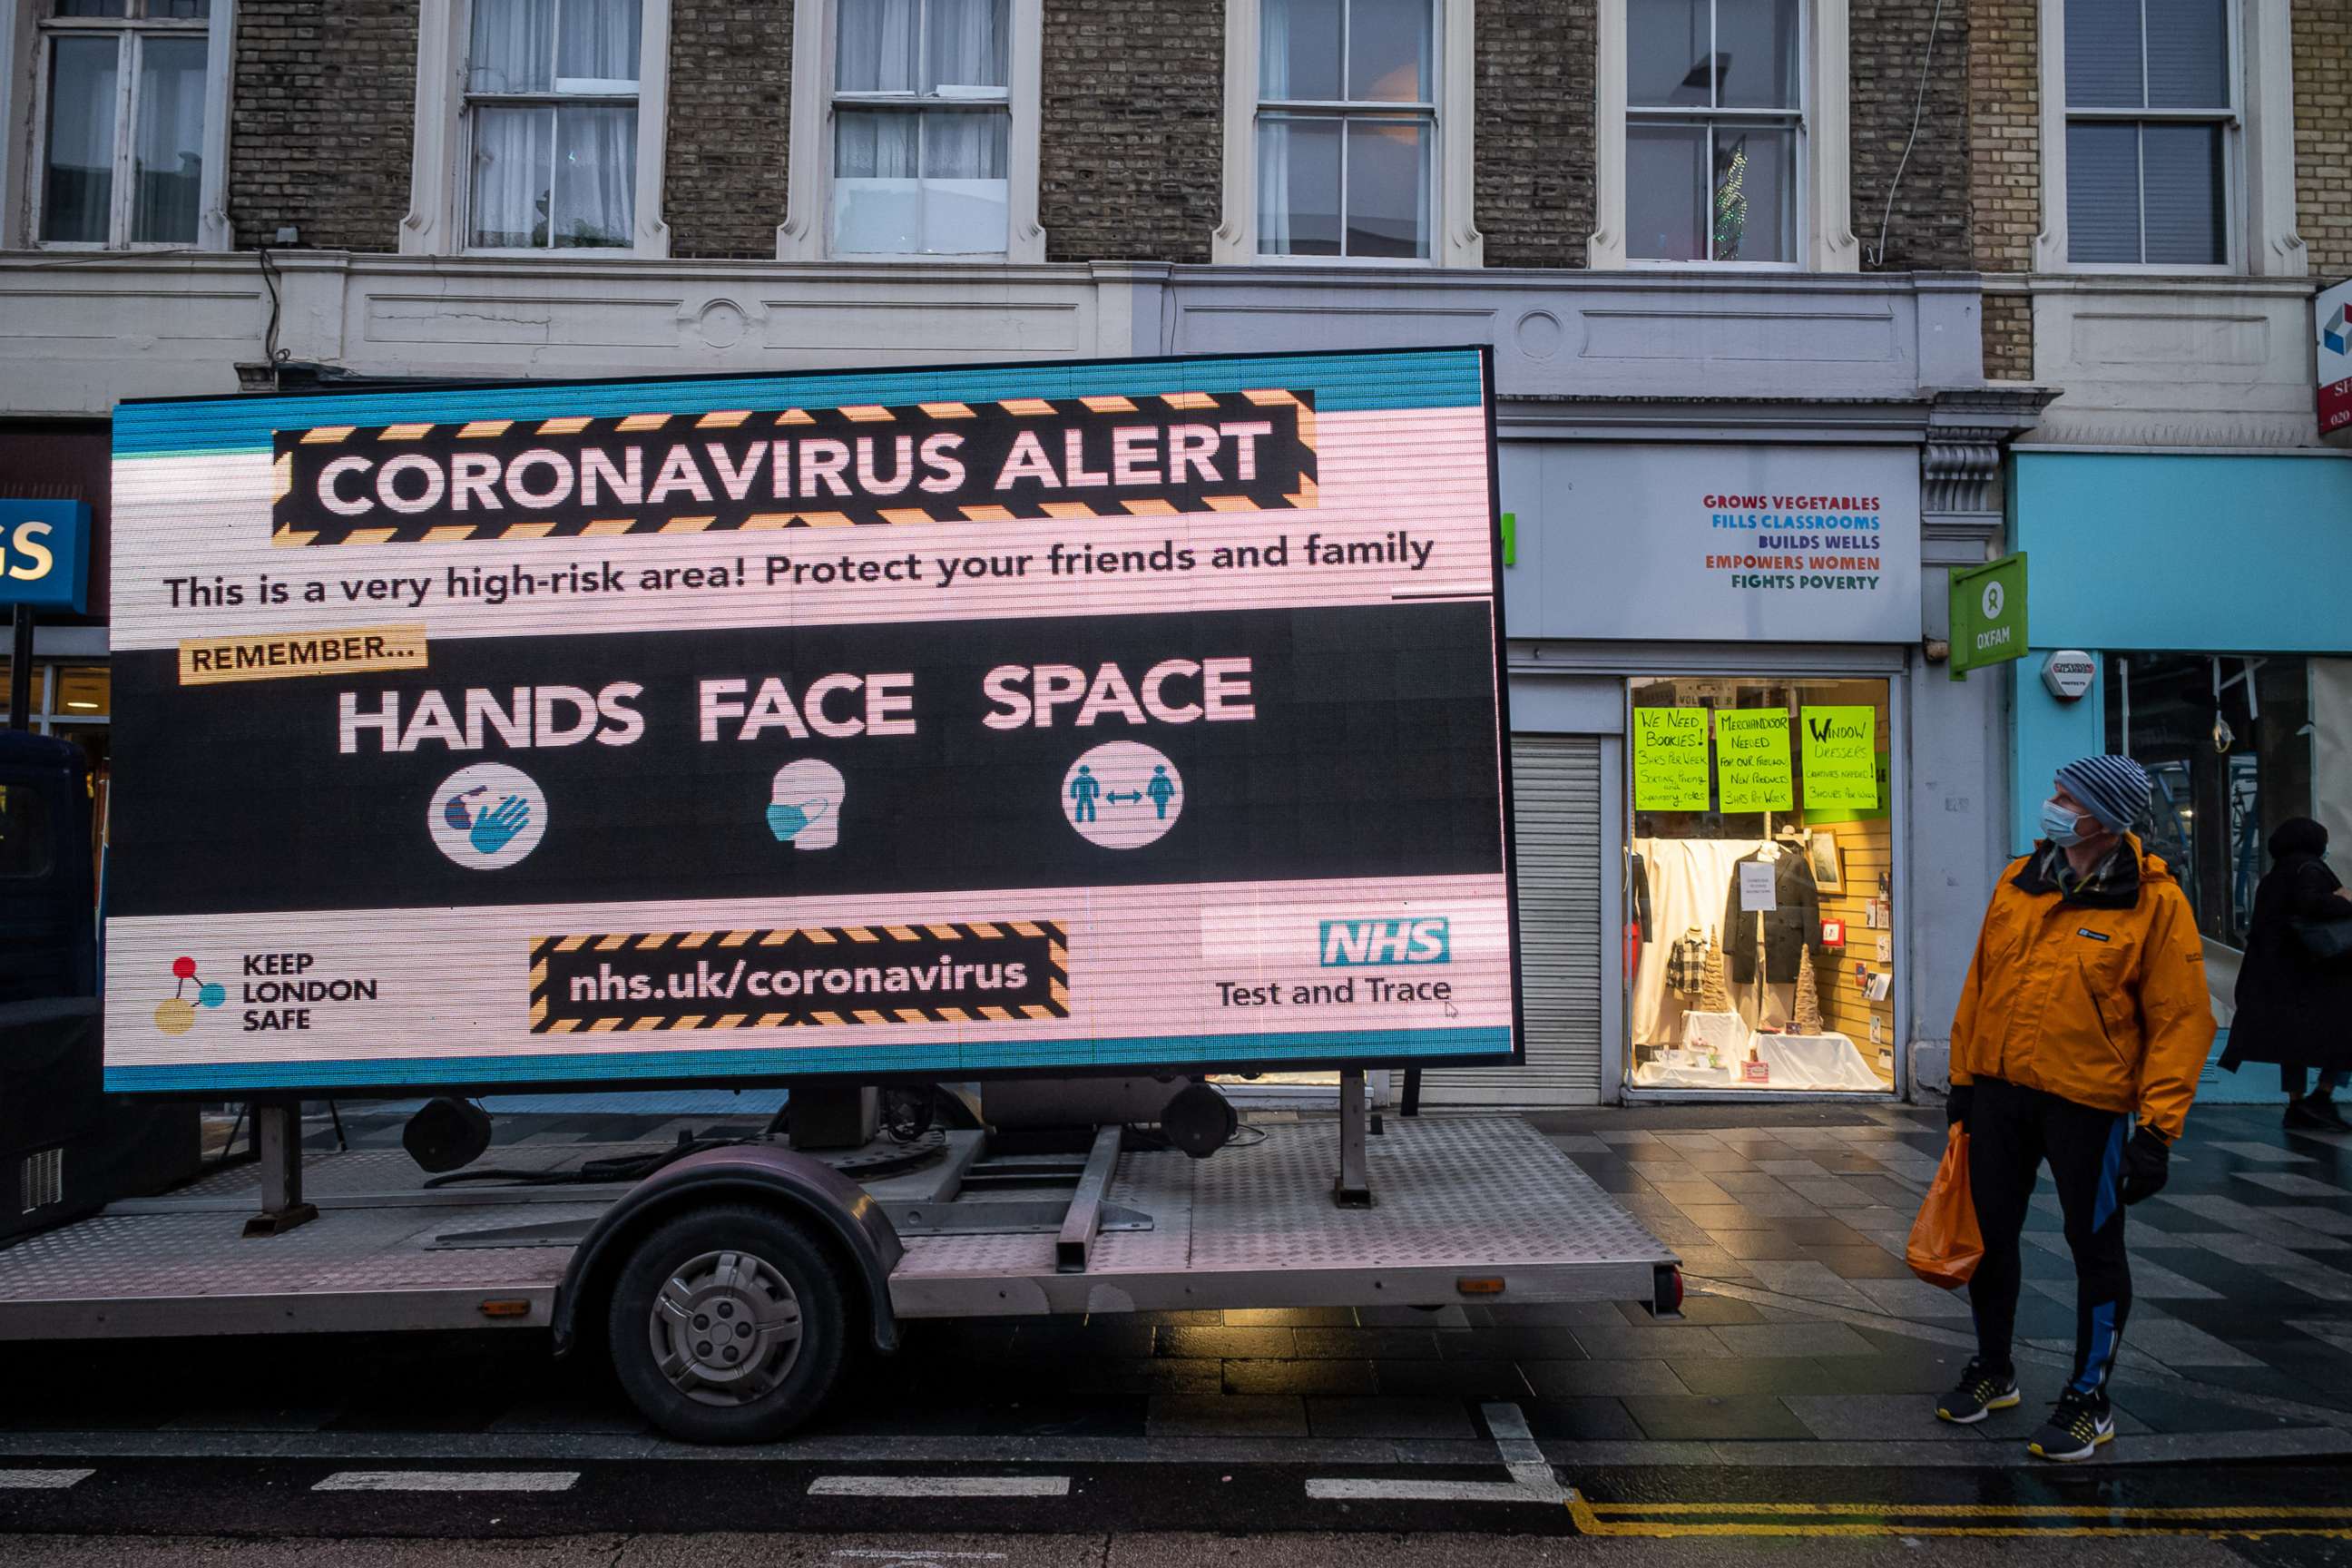 PHOTO: A man looks at a huge coronavirus alert sign warning members of the public to be vigilant in Putney, South West London, on Dec. 23, 2020.